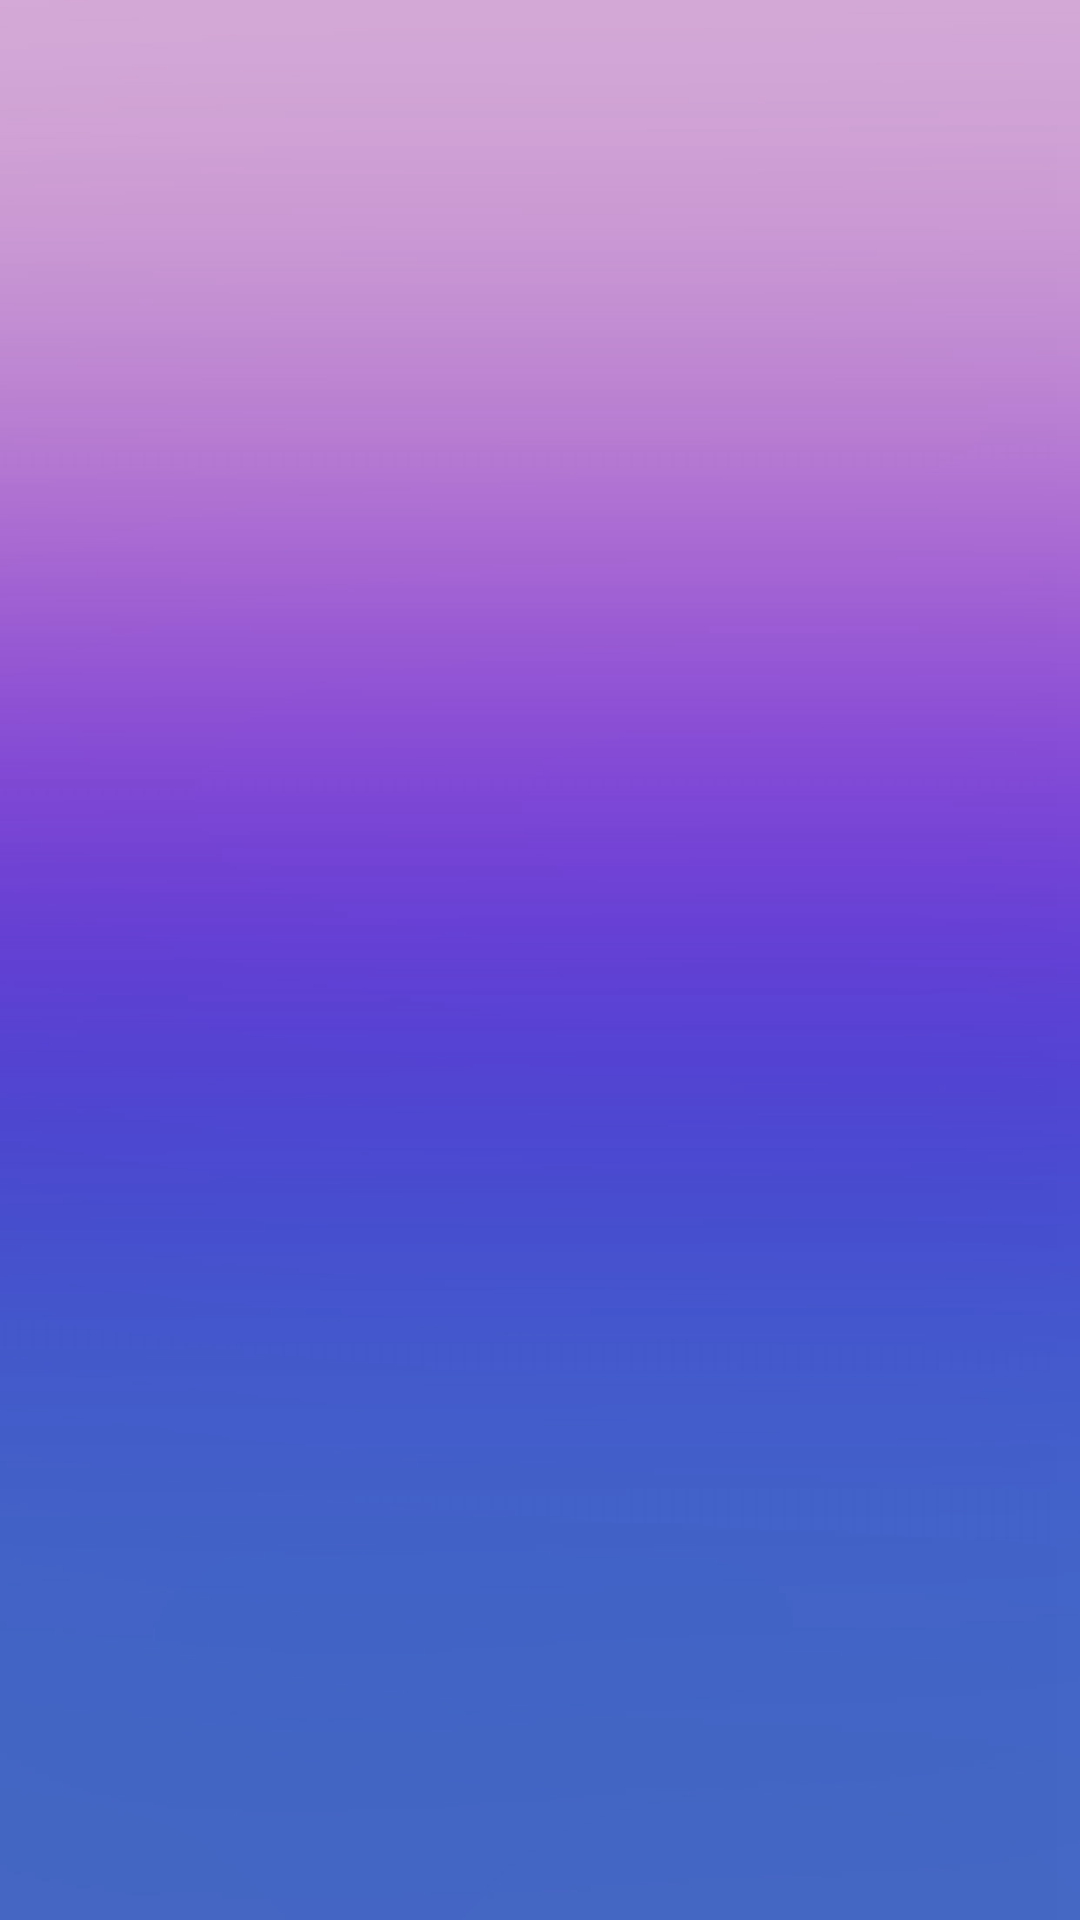 iPhone wallpaper ombre green  Ombre wallpapers, Purple ombre